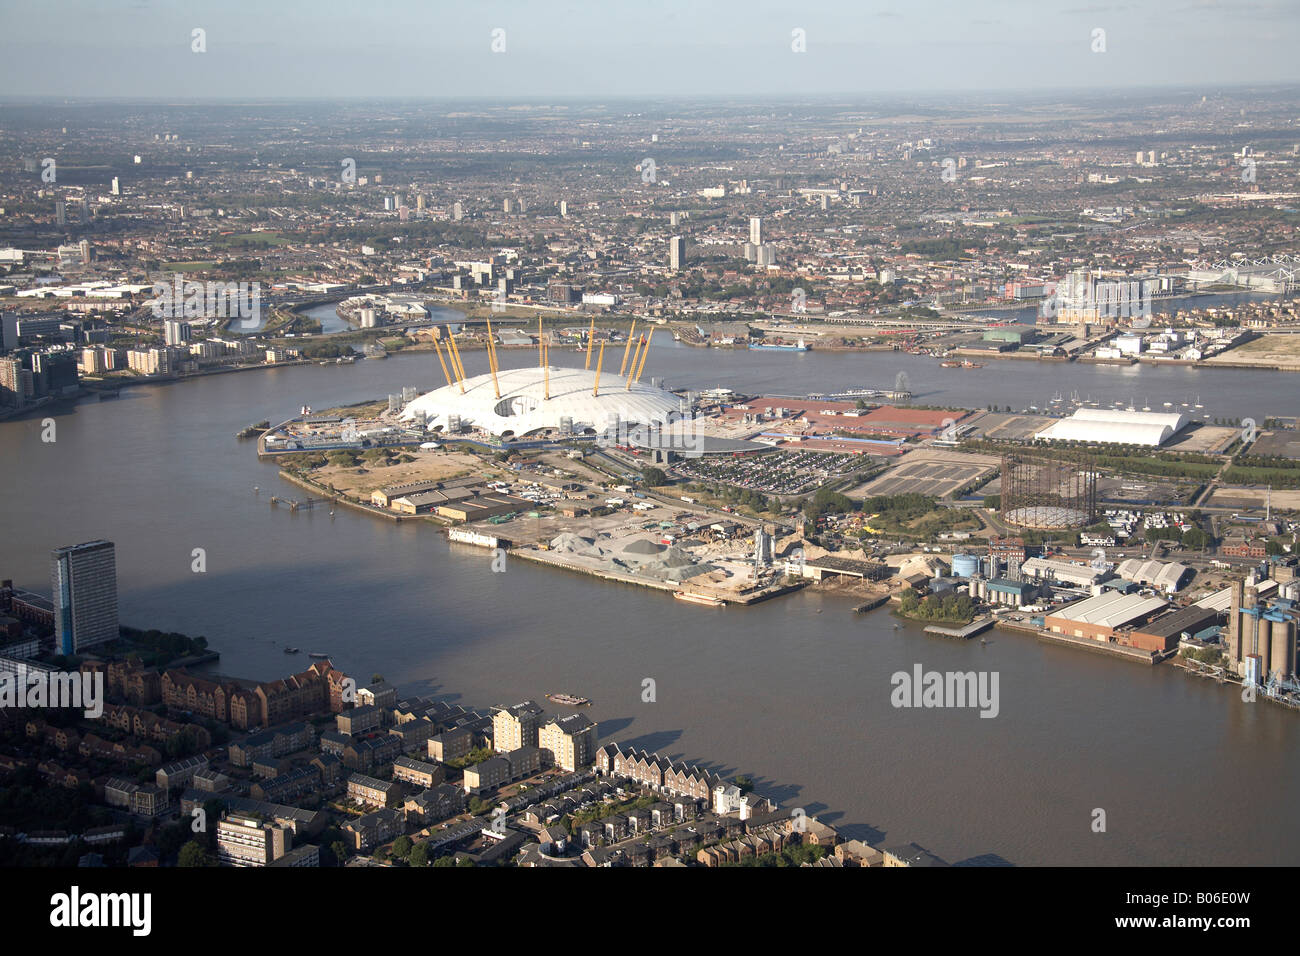 Aerial view north east of Millennium Dome North Greenwich River Thames Leamouth and Canning Town London SE10 E14 E16 England UK Stock Photo